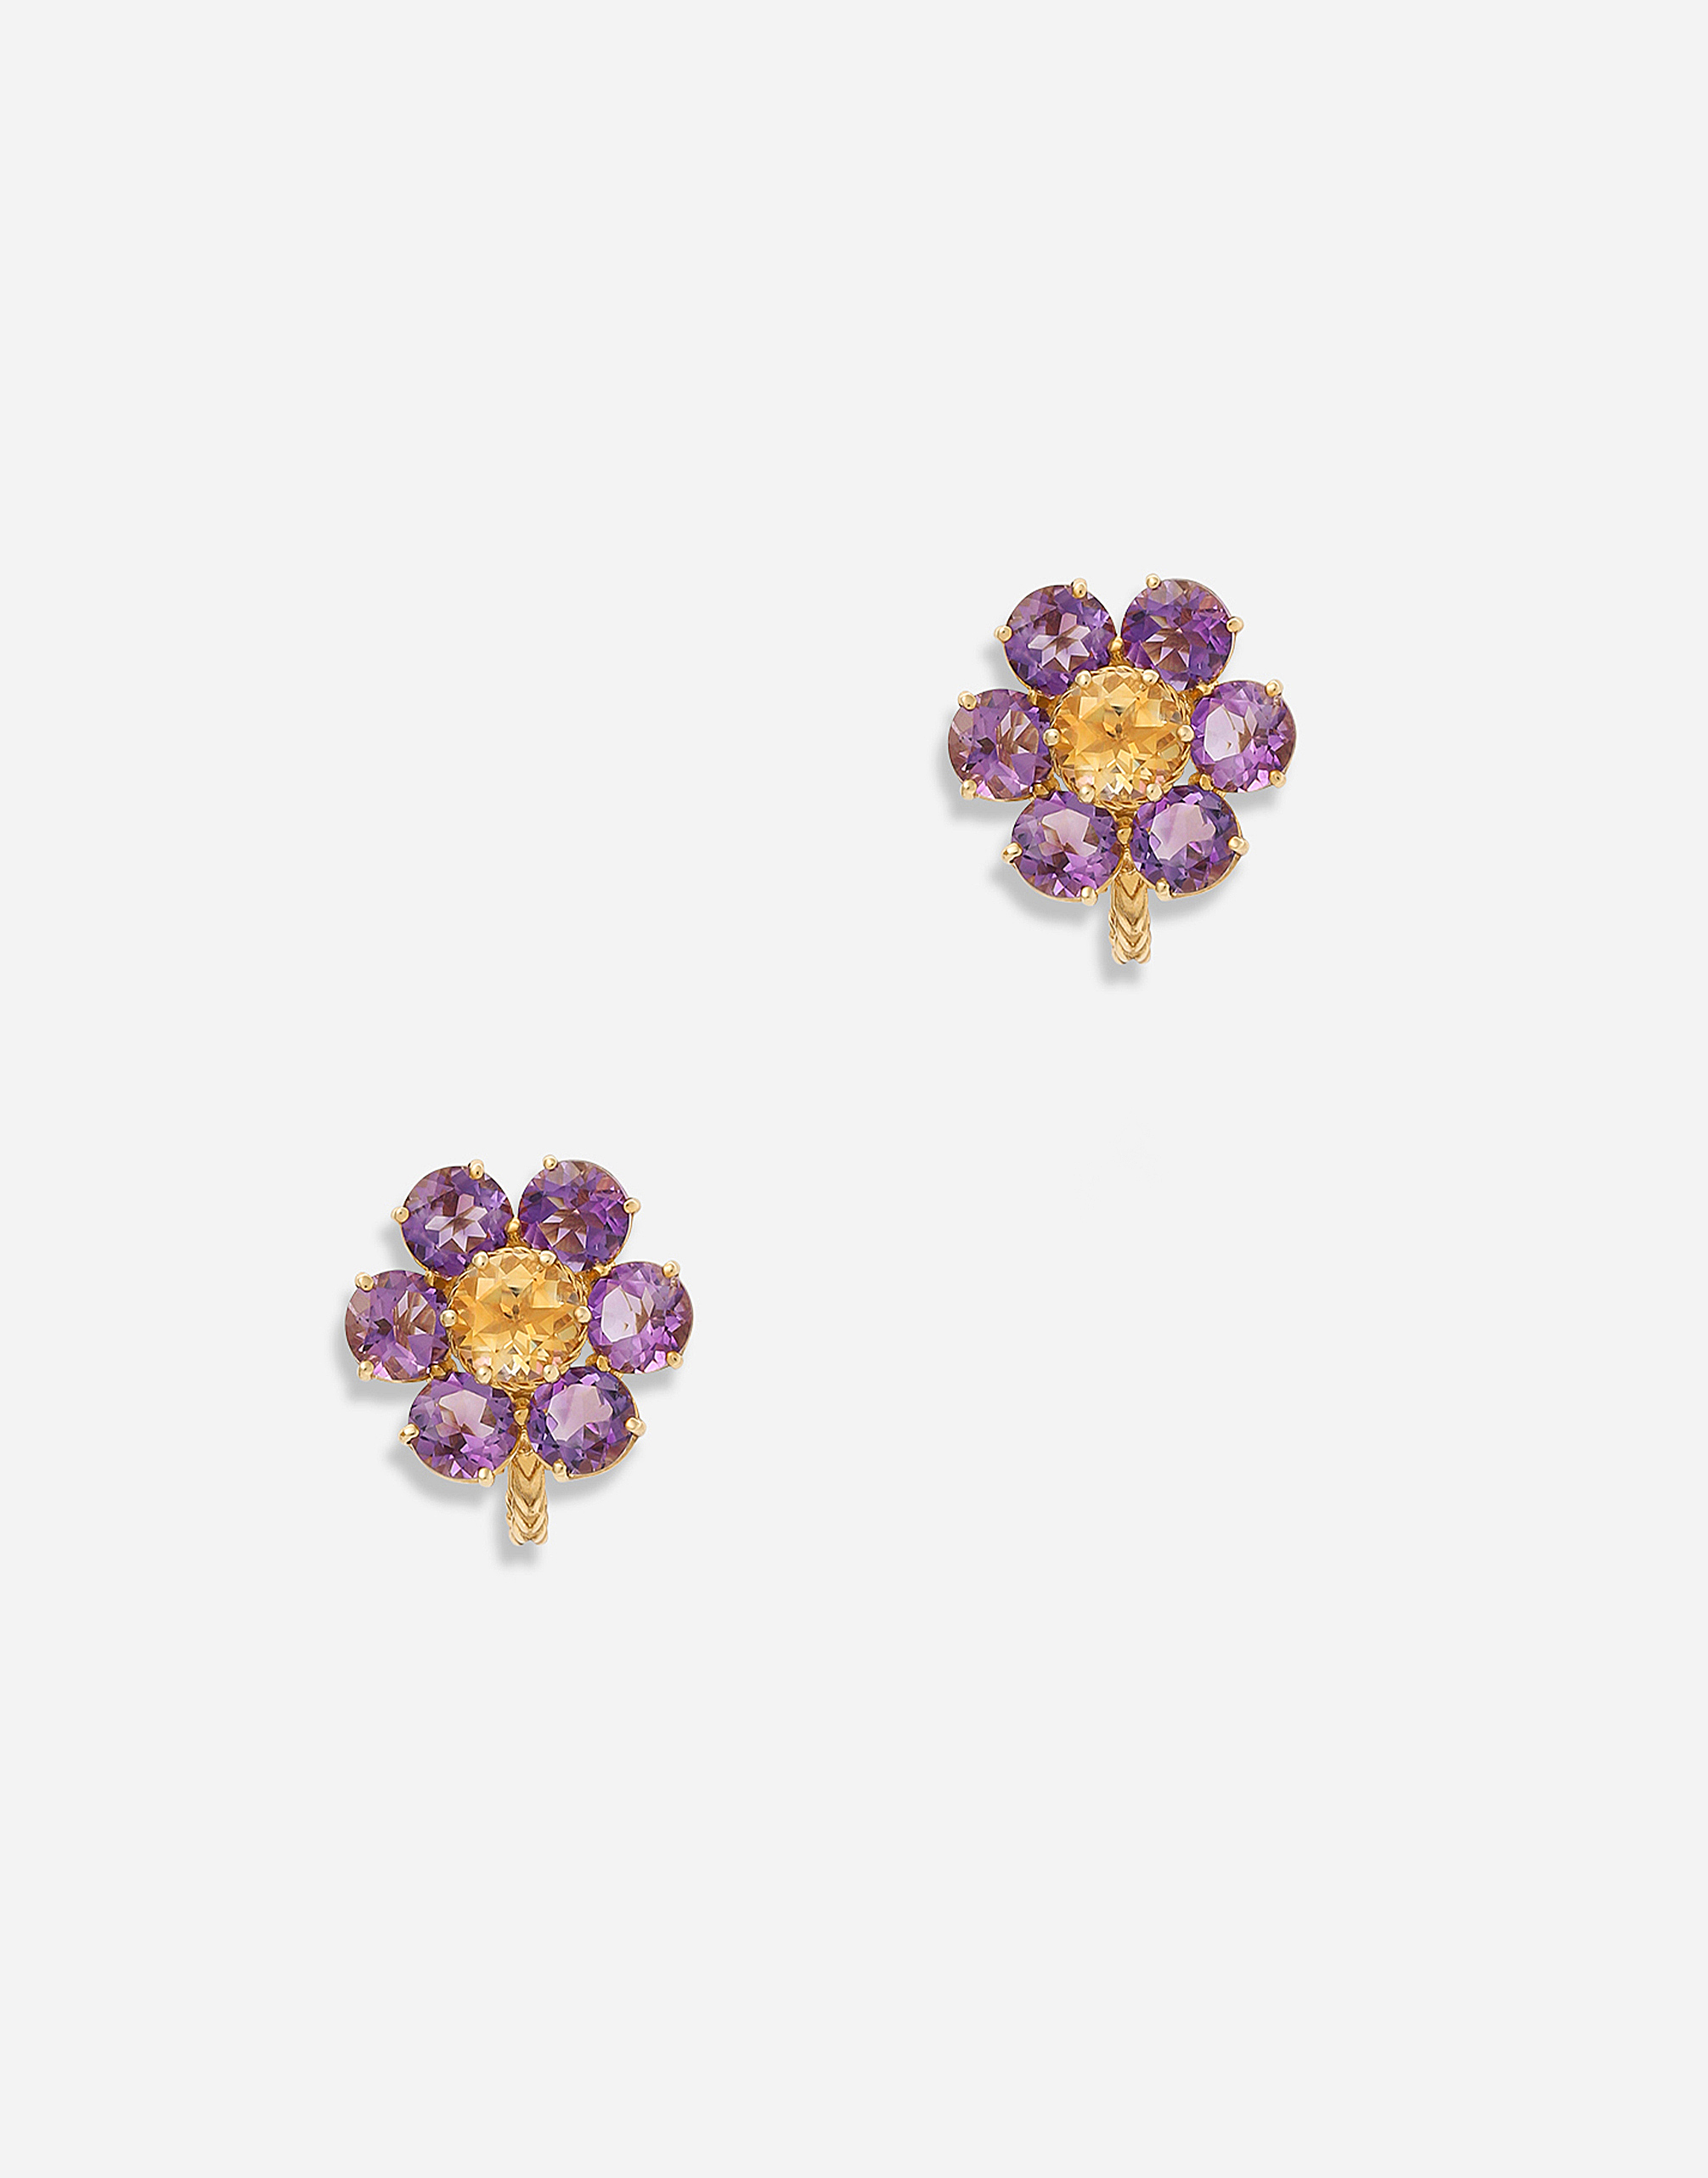 Spring earrings in yellow 18kt gold with amethyst flower motif in Gold